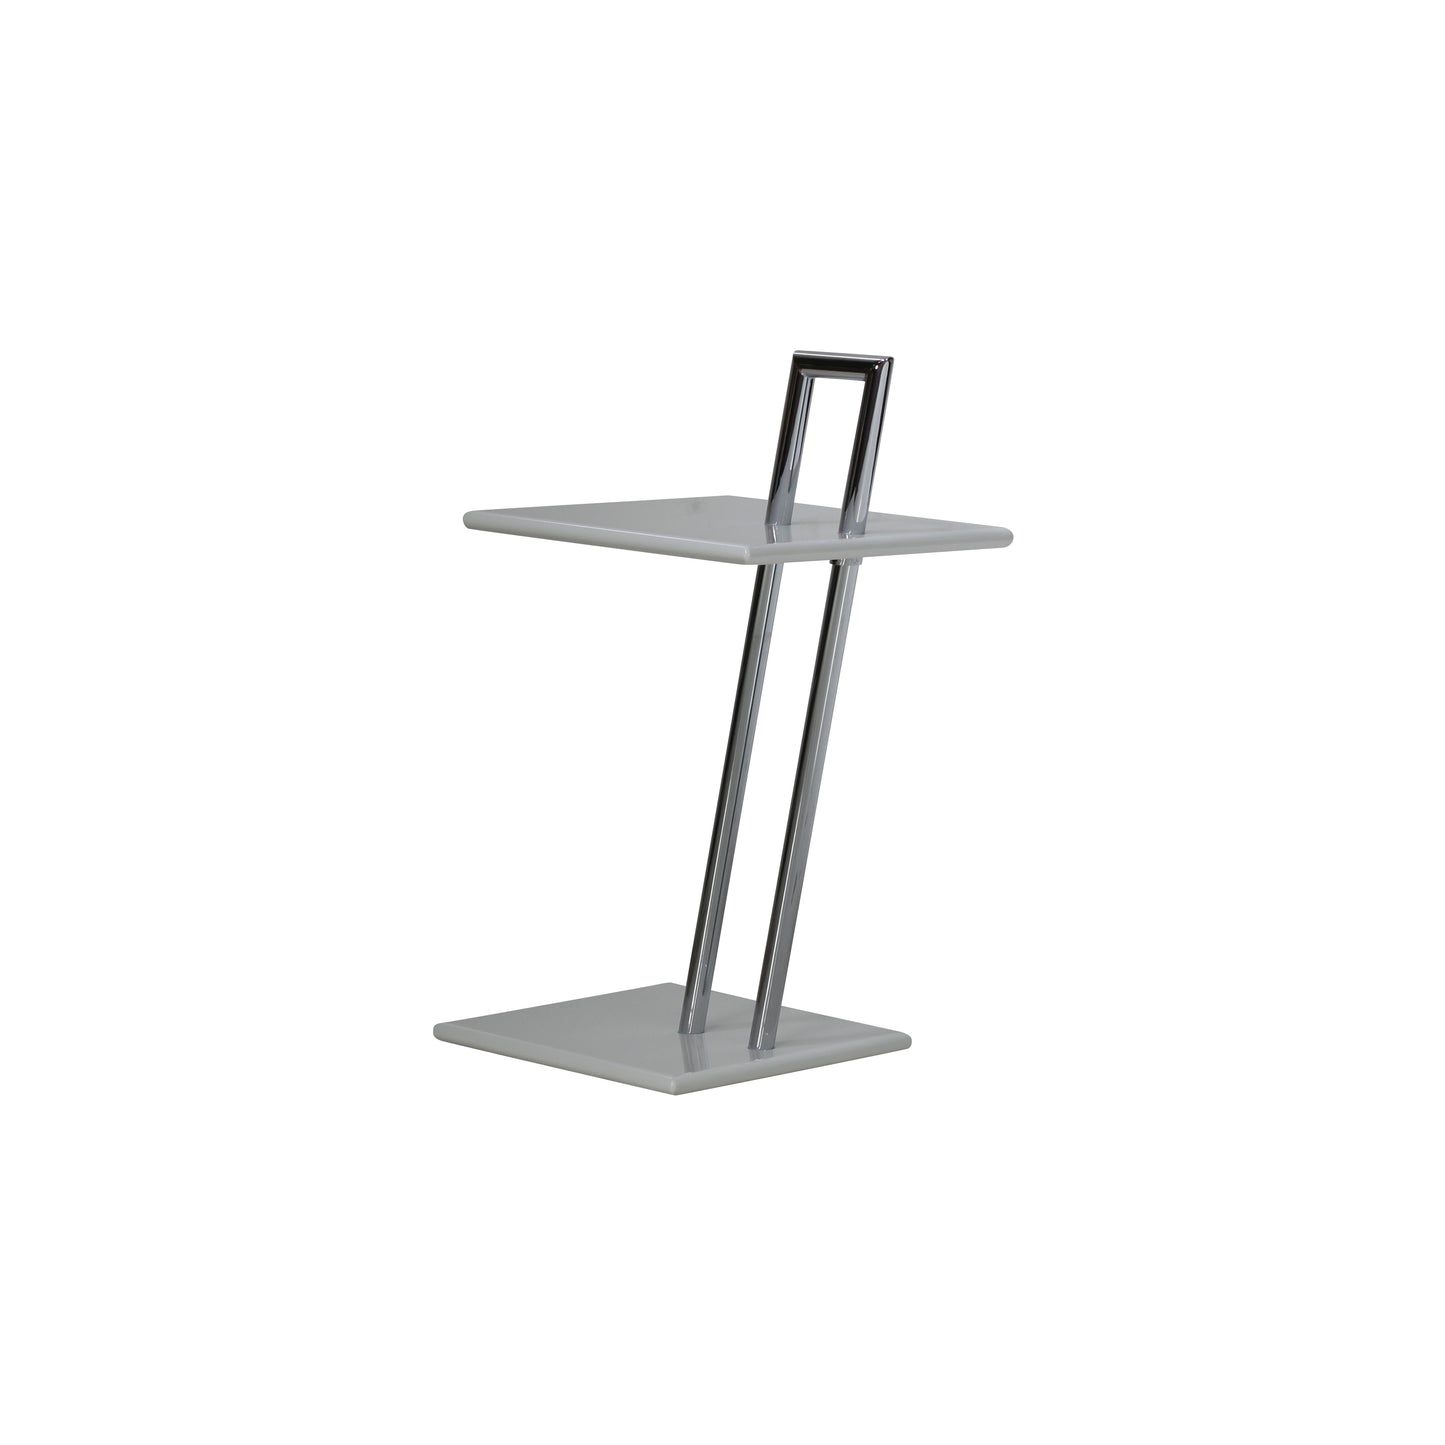 The occasional table square style | White | Side